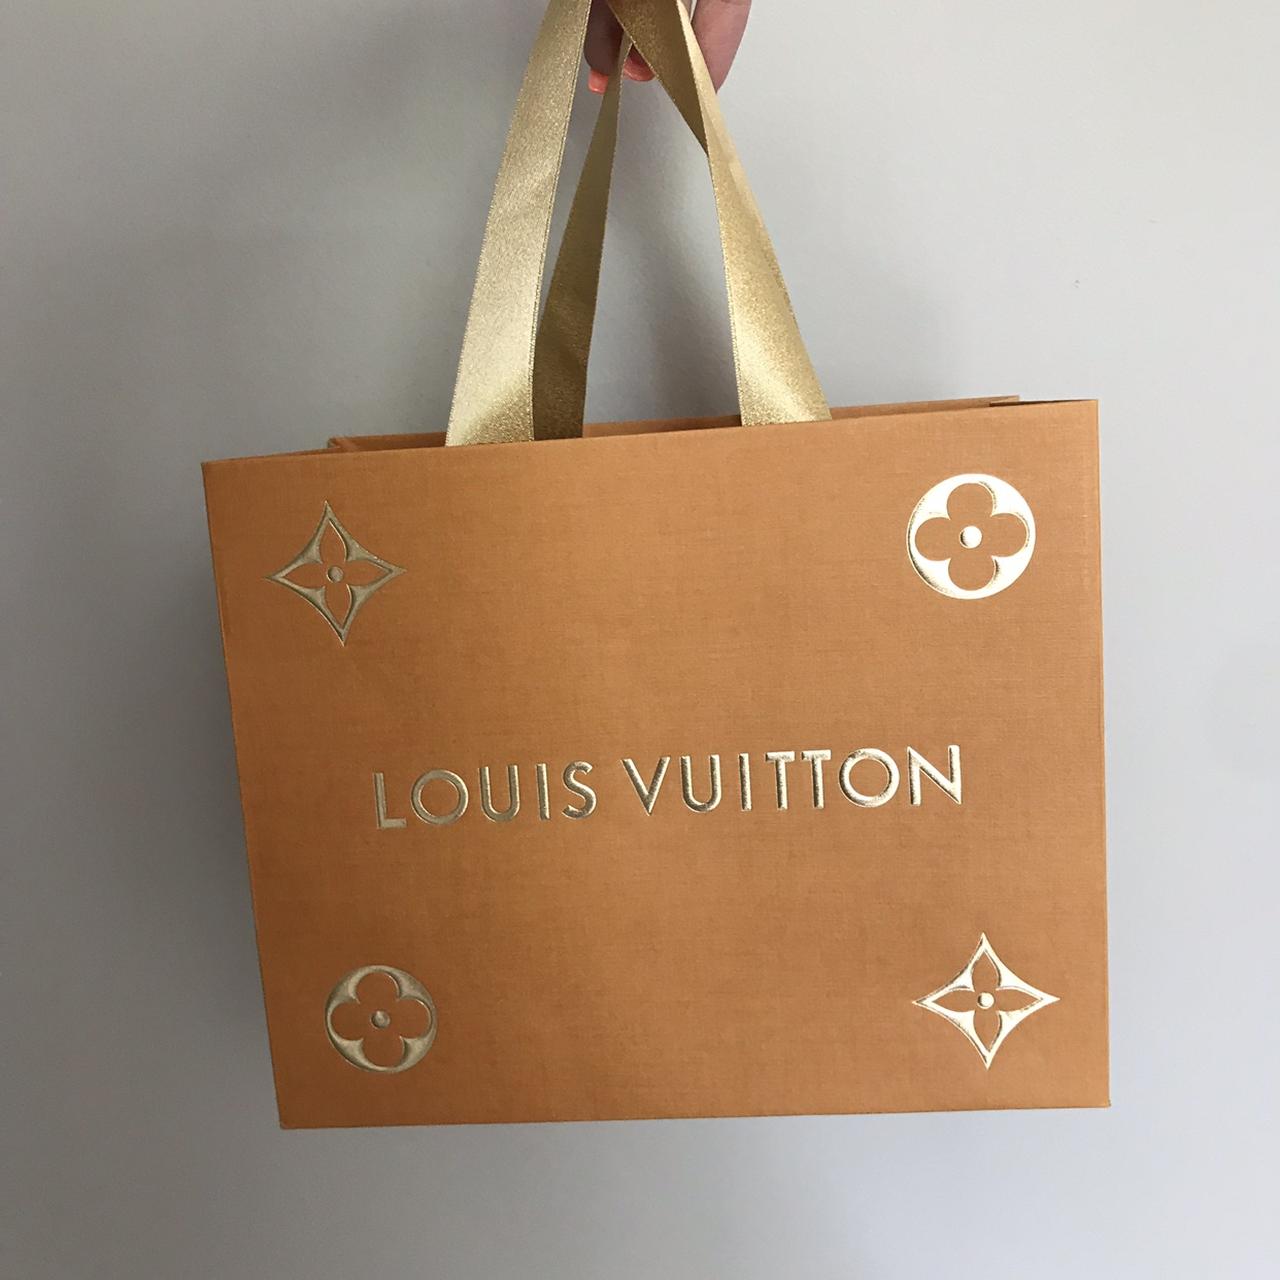 louis vuitton gift bag please dm for any questions - Depop